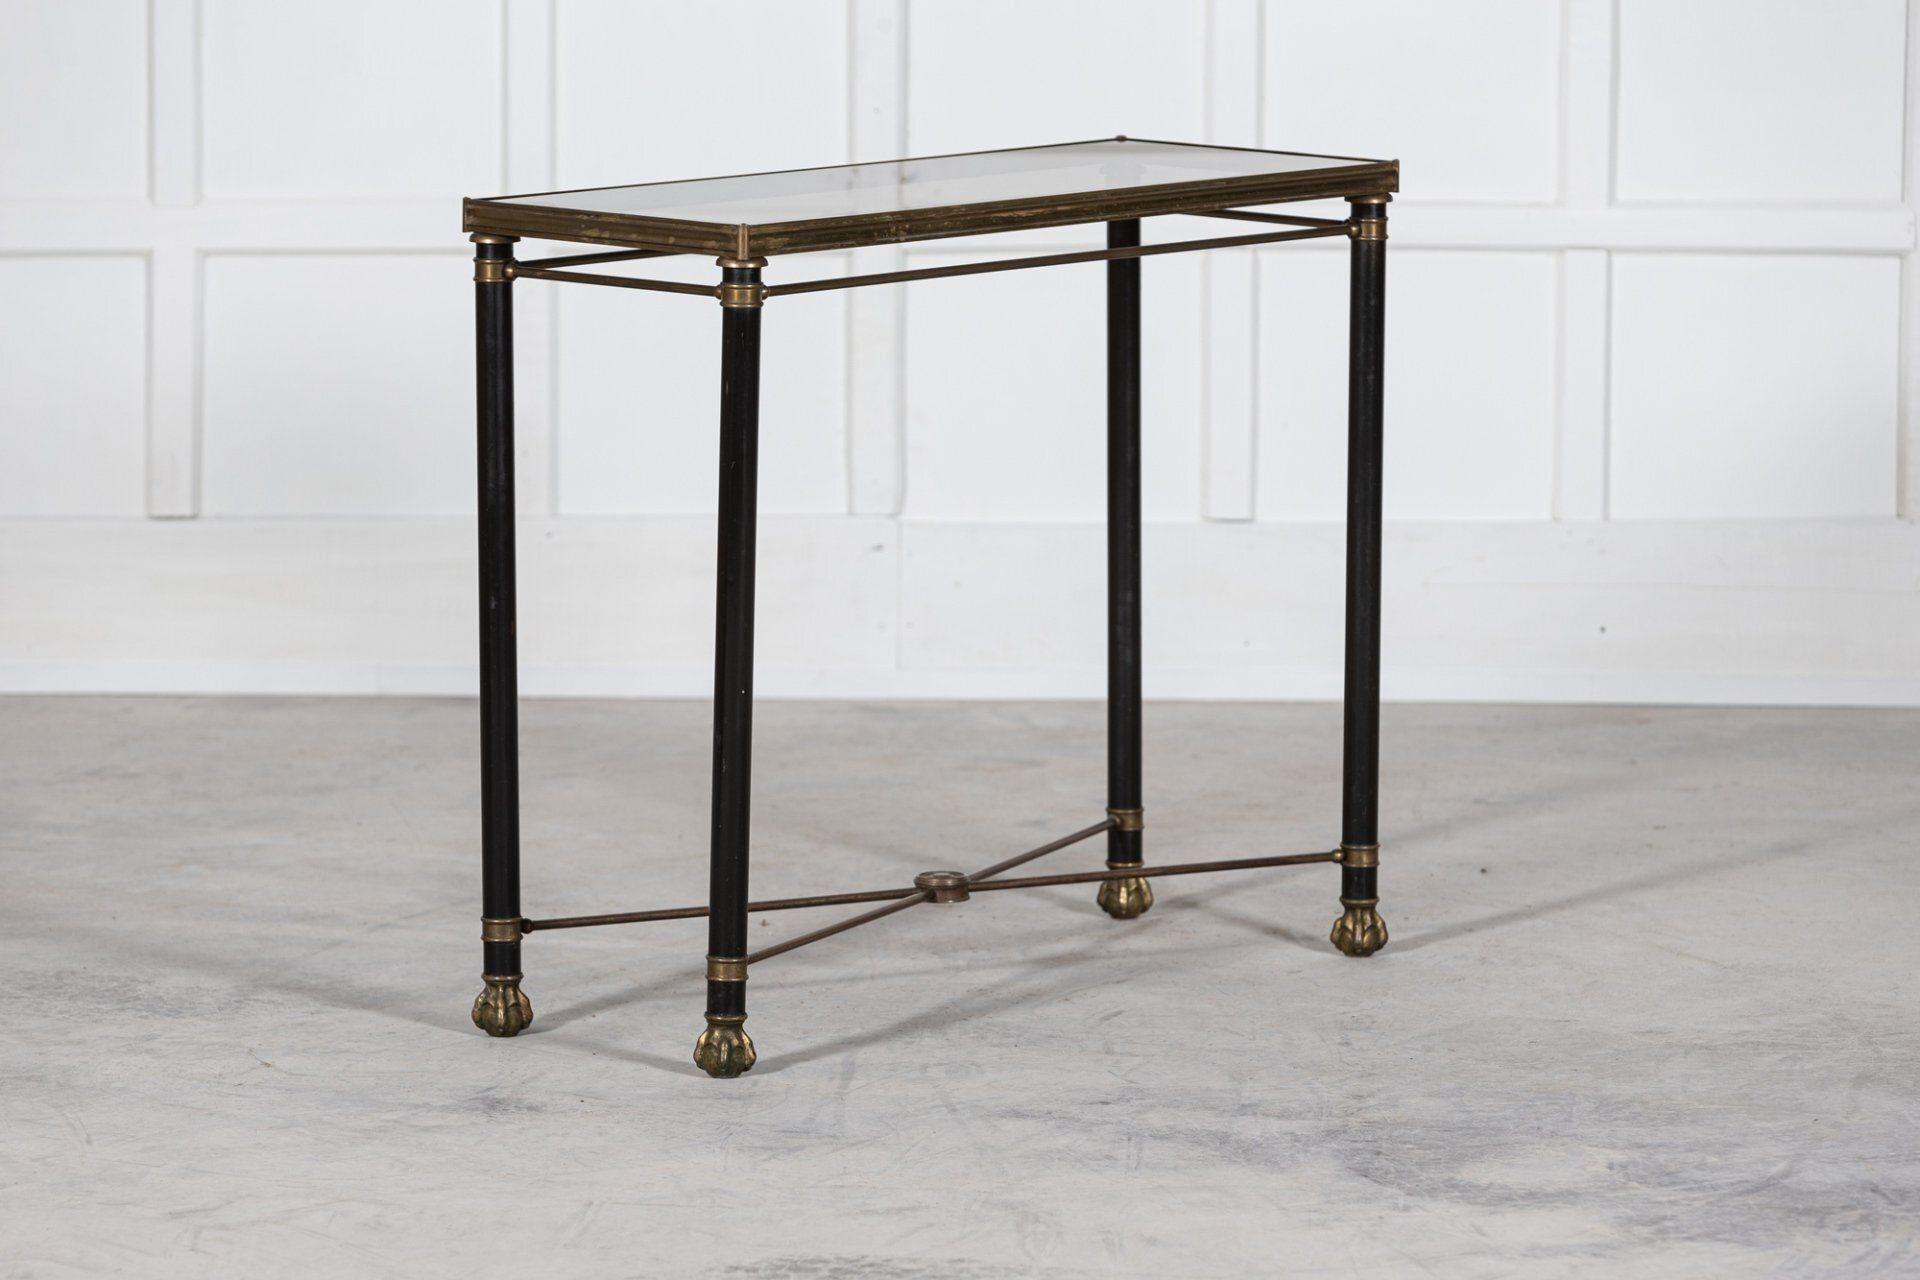 Circa 1950.
Mid 20th C French empire style console table.
Gilt metal inset glazed top, base with X stretcher and claw feet.
Sku 1137.
W90 x D36 x H78cm.